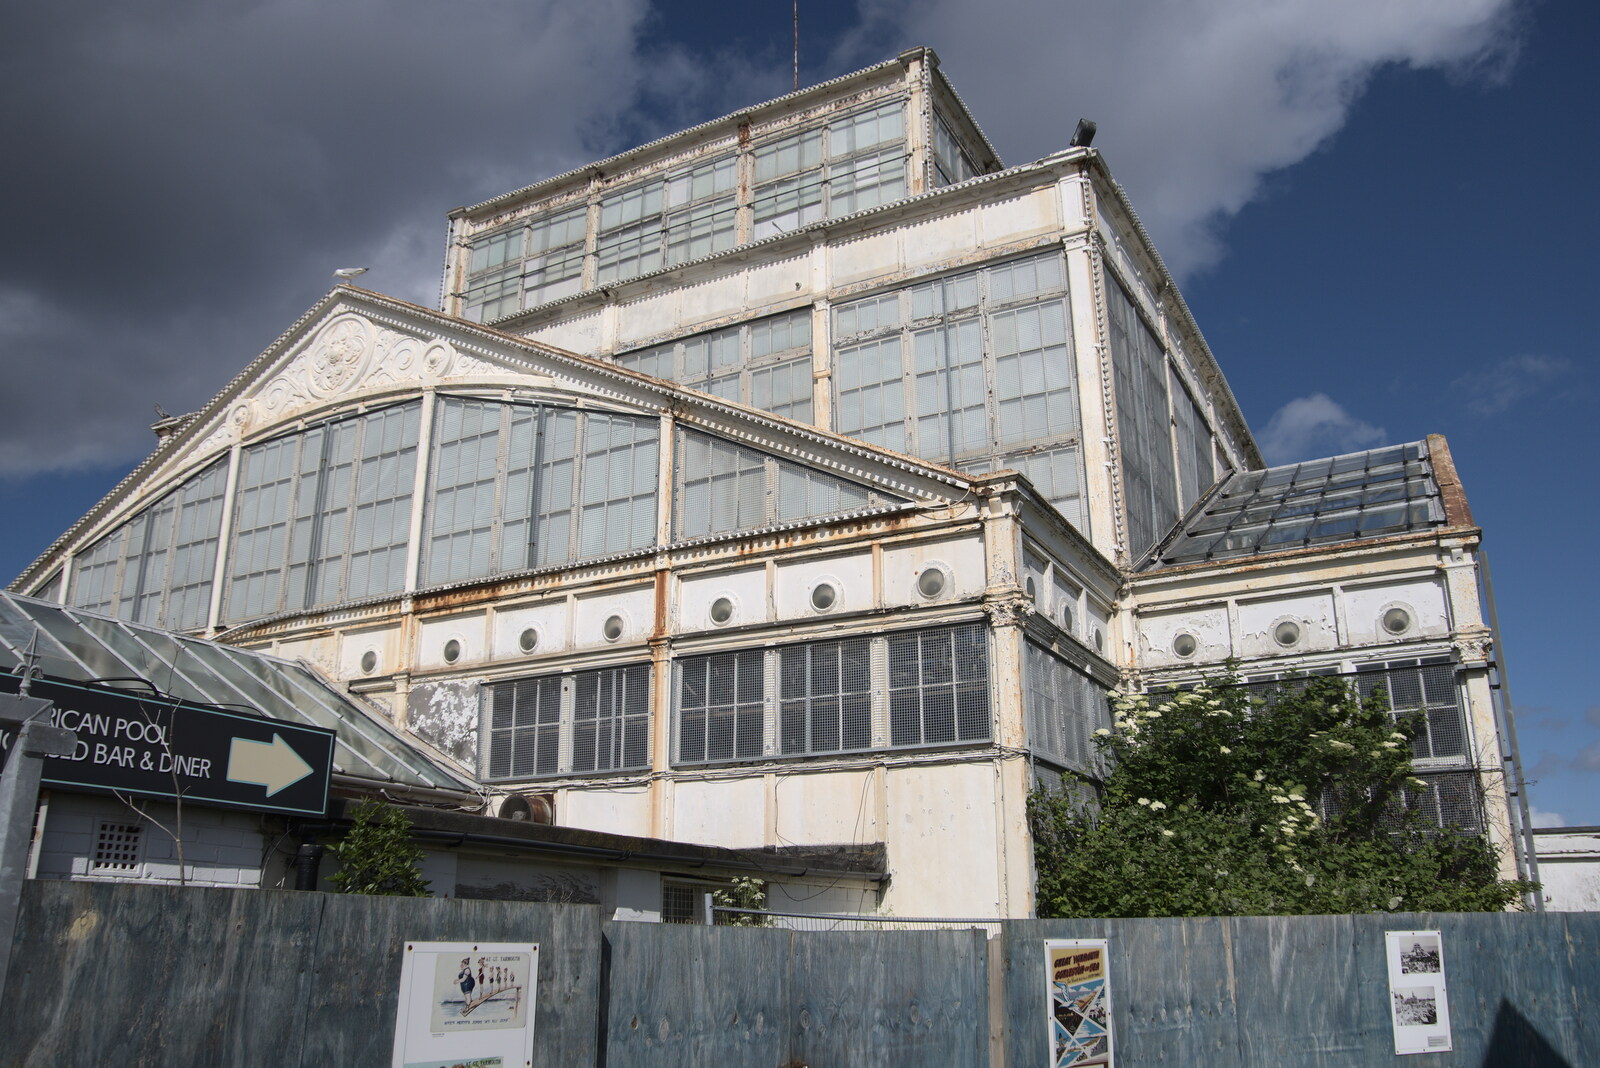 The derelict Winter Gardens from Faded Seaside Glamour: A Weekend in Great Yarmouth, Norfolk - 29th May 2022